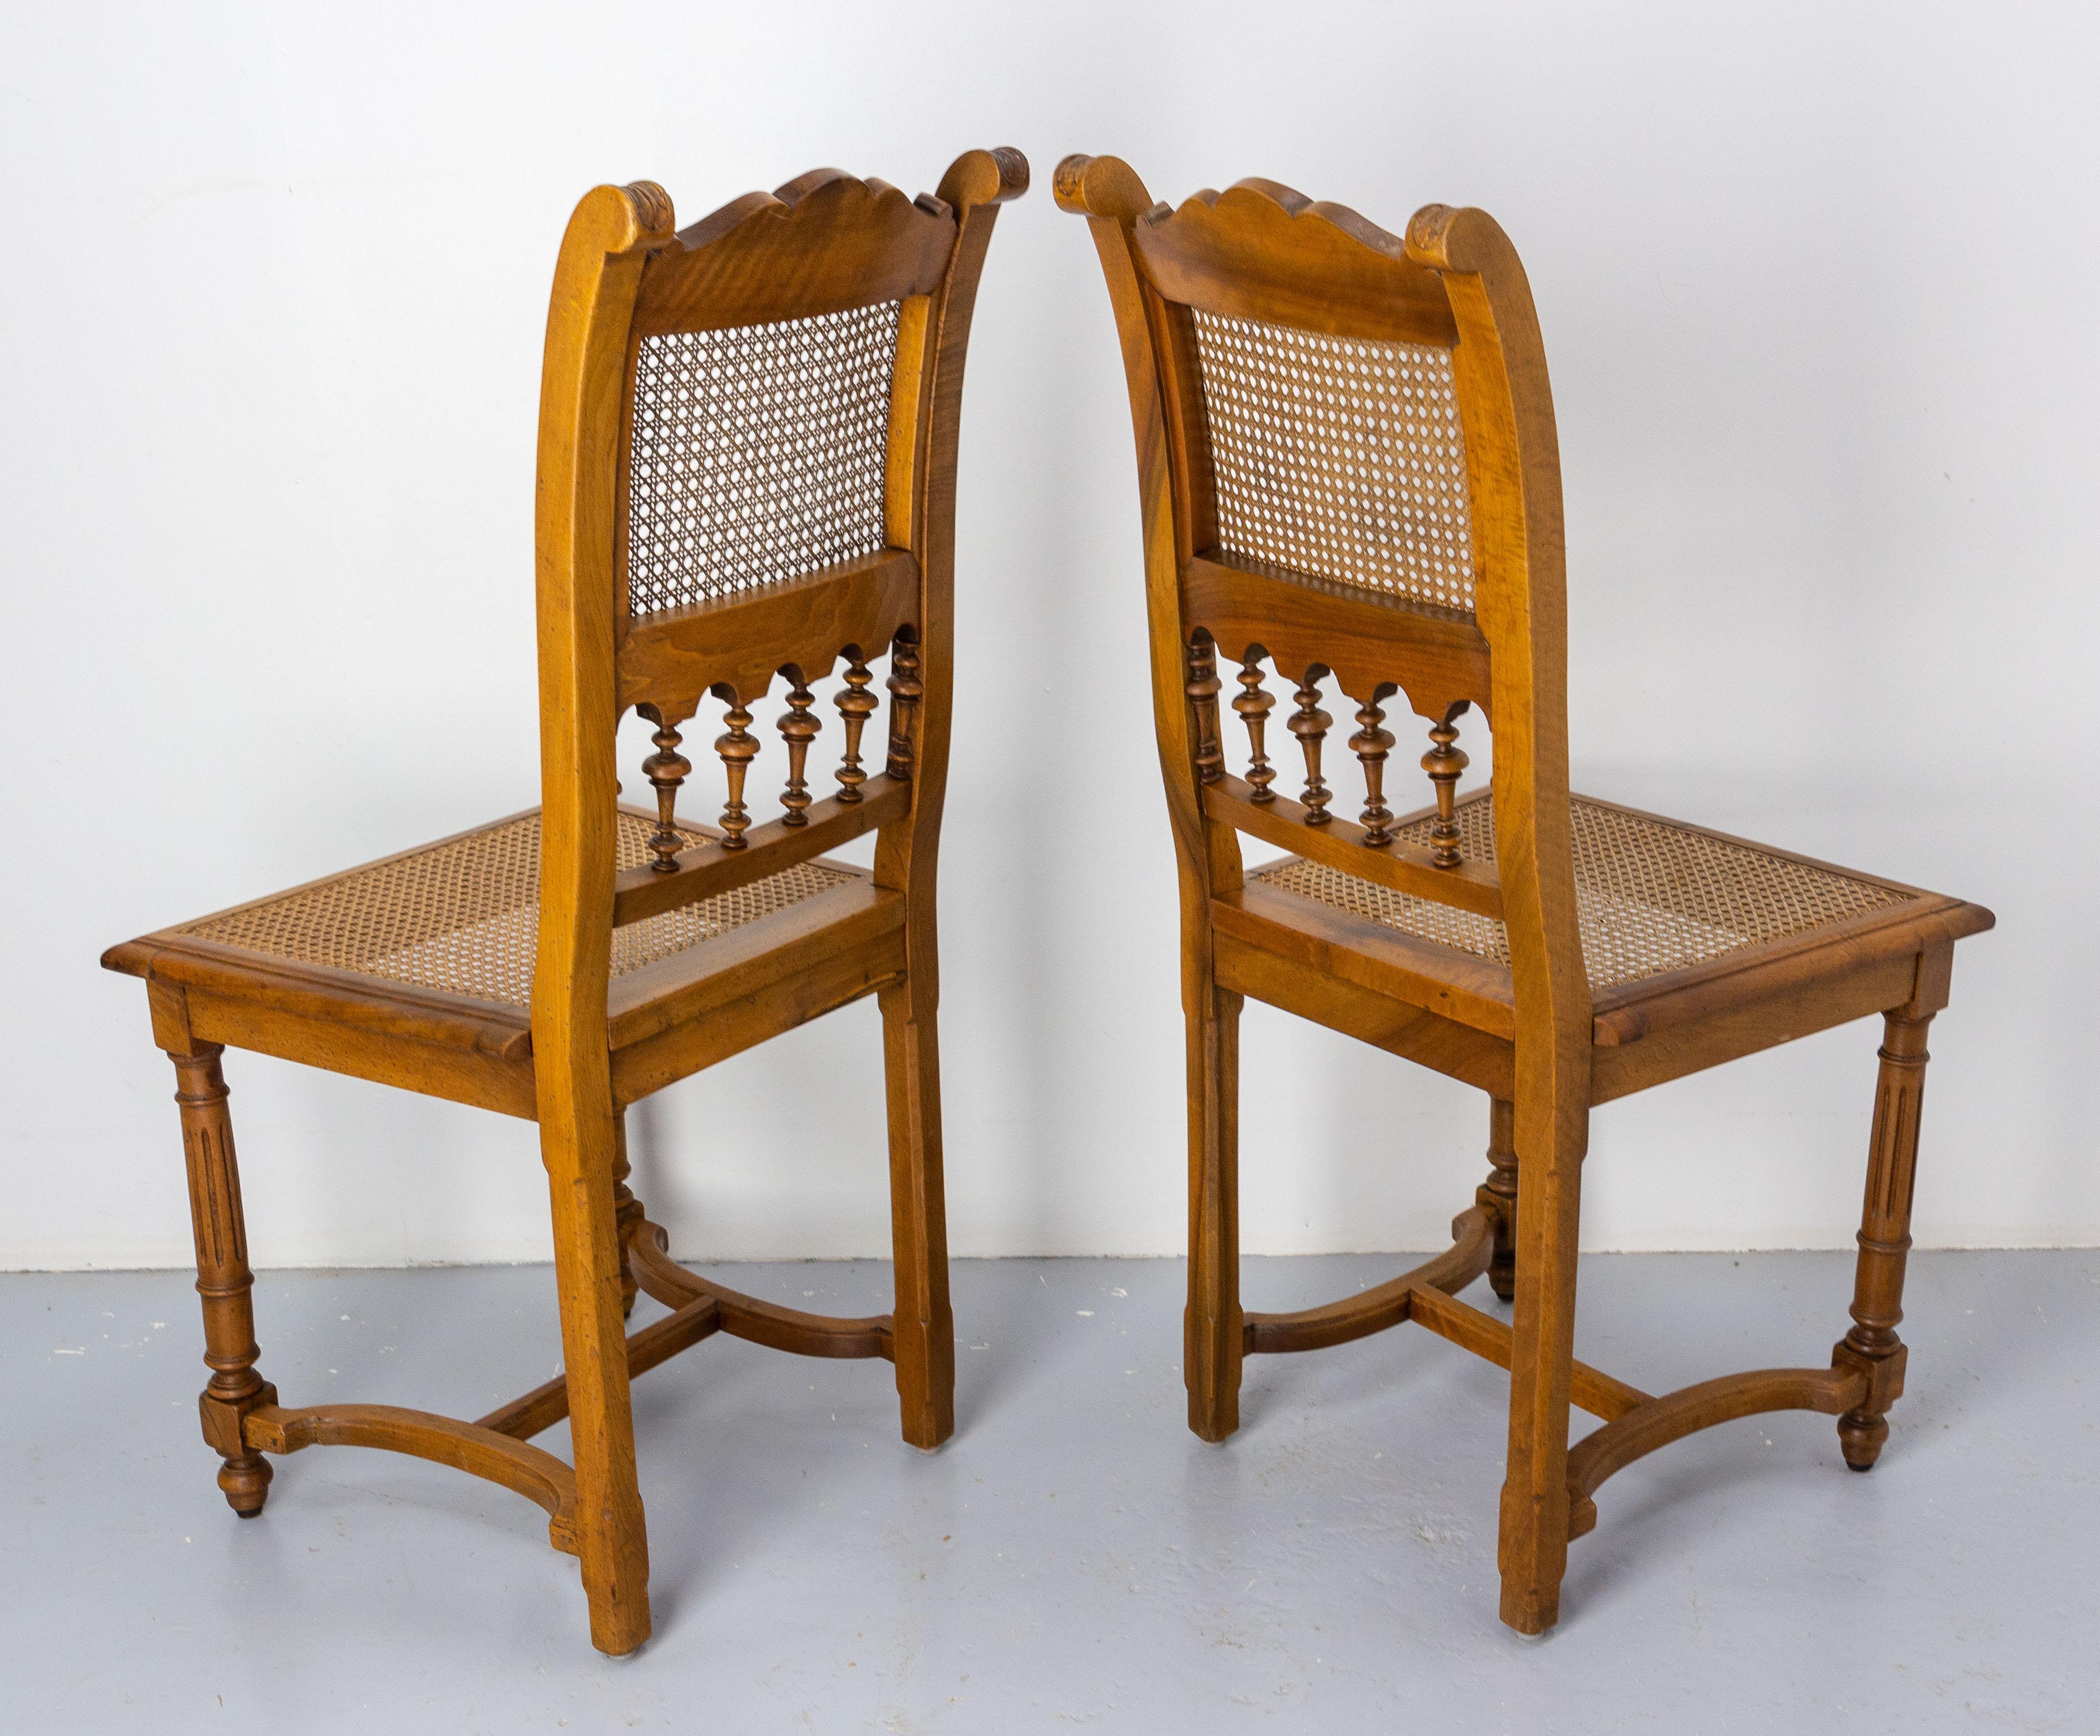 Four Chairs Walnut and Cane in the Louis XIII Style, French, circa 1900 For Sale 4